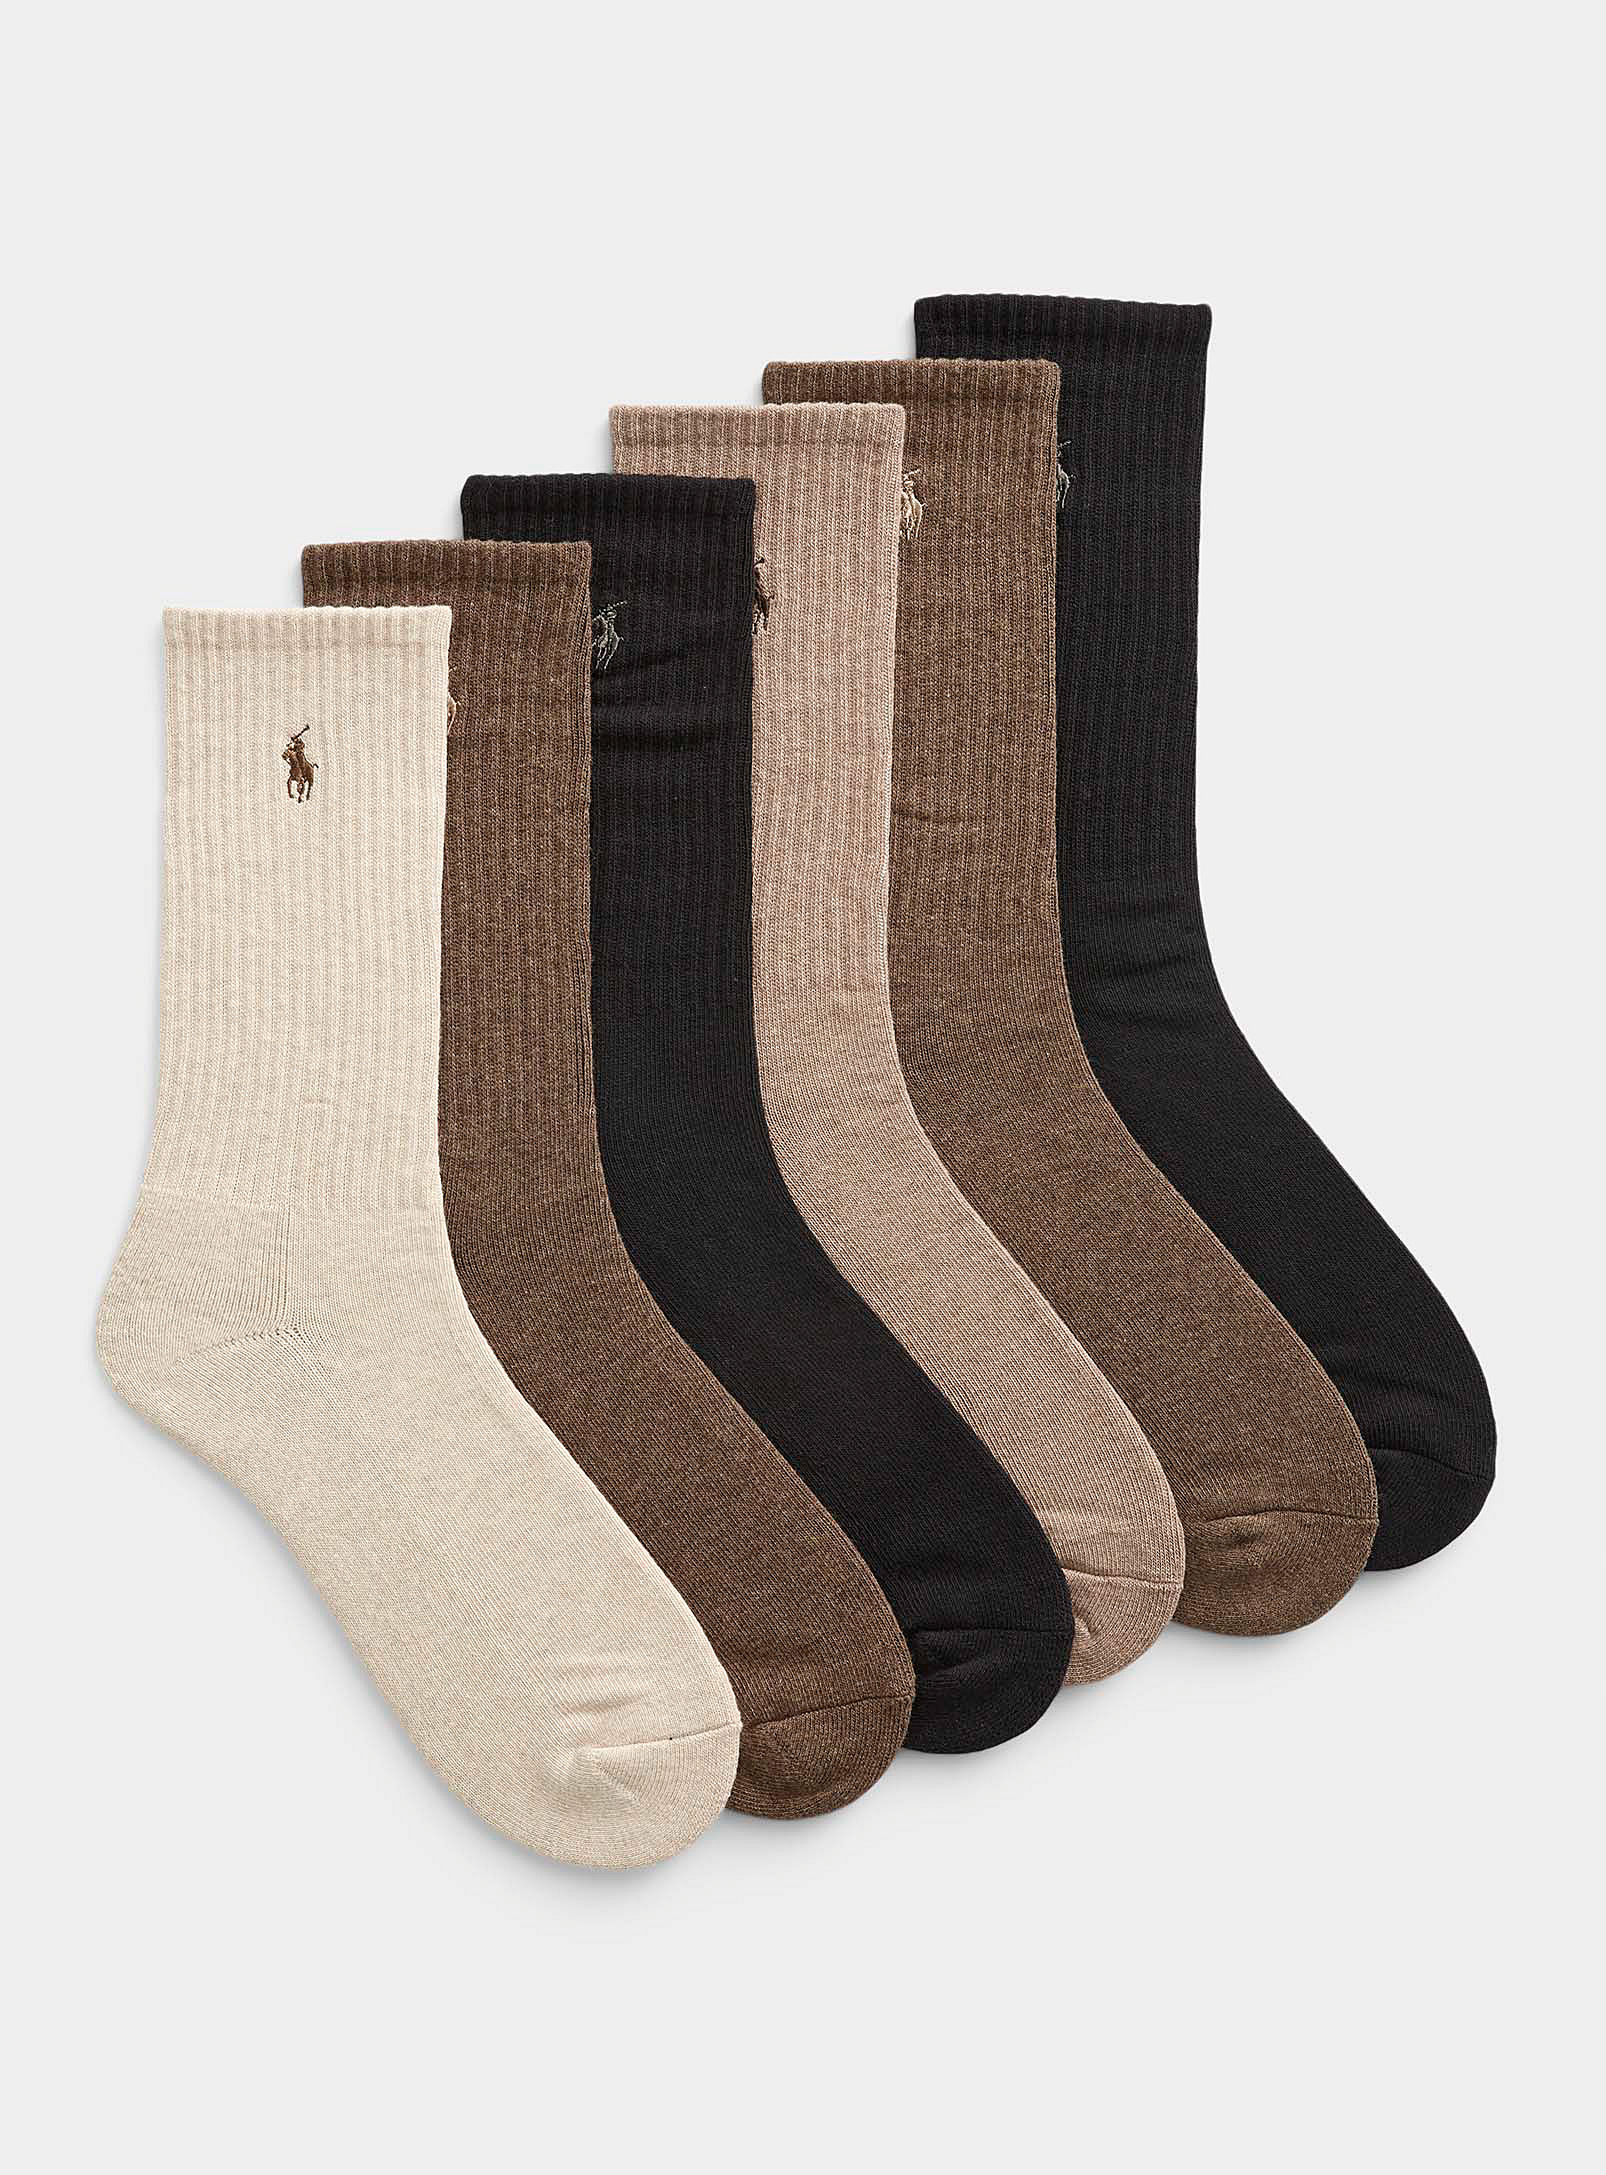 Polo Ralph Lauren Natural Hued Athletic Socks 6-pack In Patterned Brown